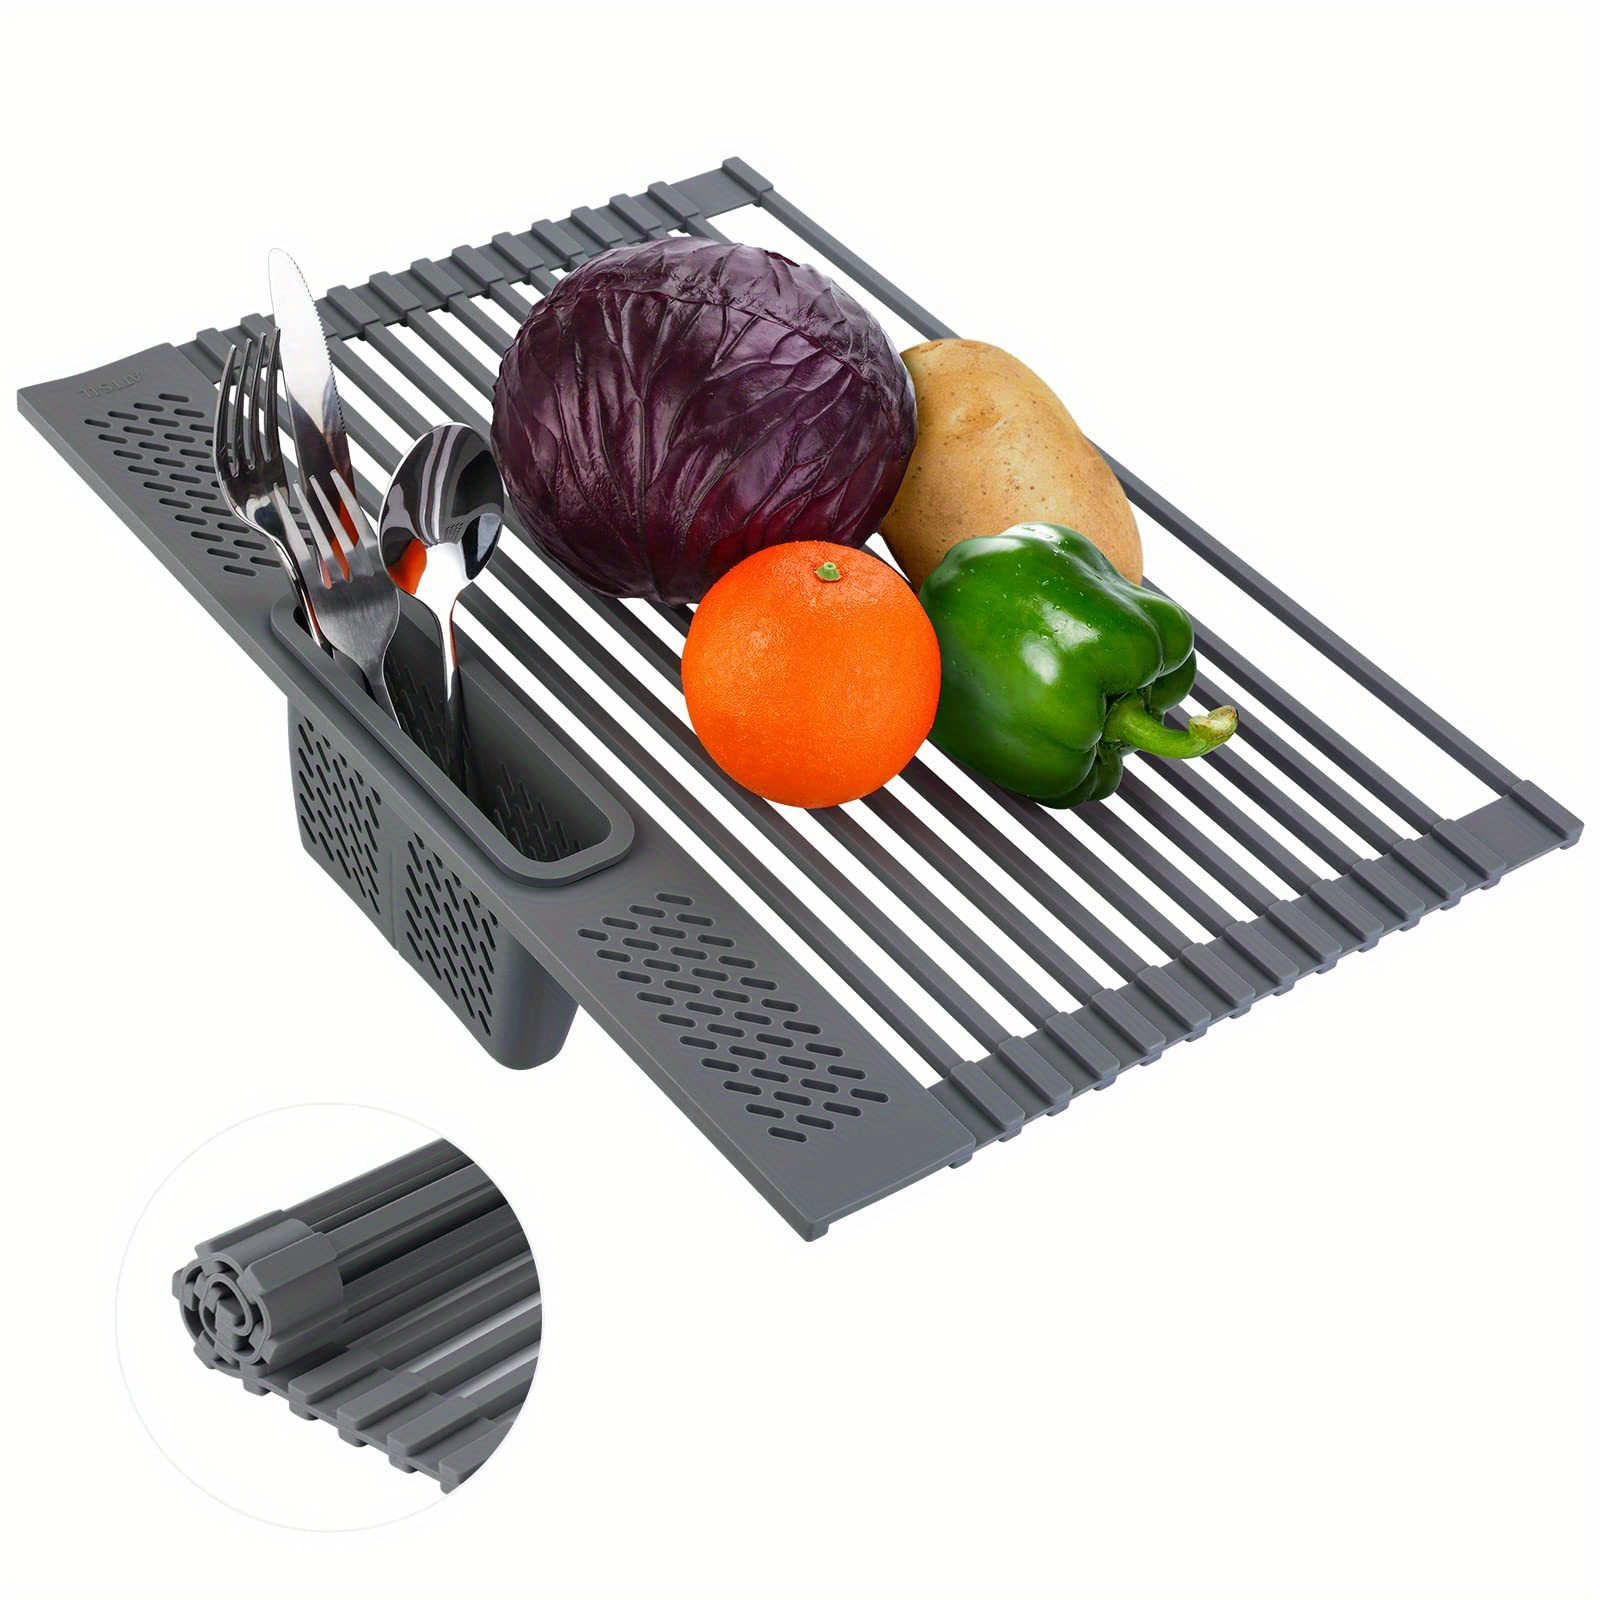 

Kitchen Roll-up Dish Drying Rack, Multifunctional Rollable Over Sink Dish Rack With Utensil Holder, Foldable Silicone Wrapped Steel Drain Rack For Kitchen Sink Counter